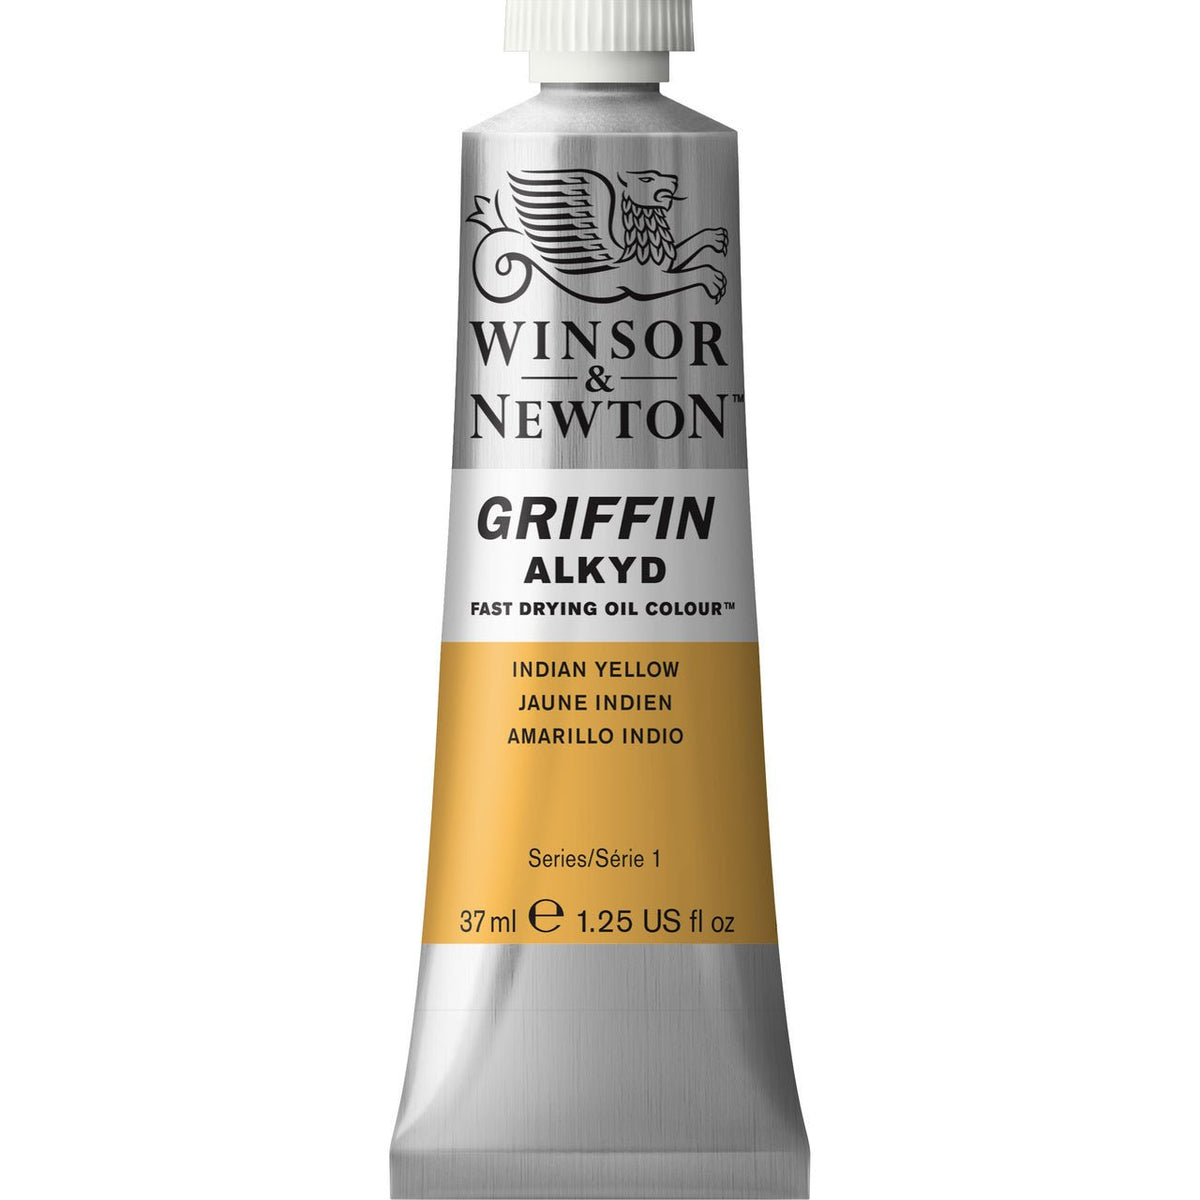 Winsor & Newton Griffin Alkyd 37ml Indian Yellow - merriartist.com